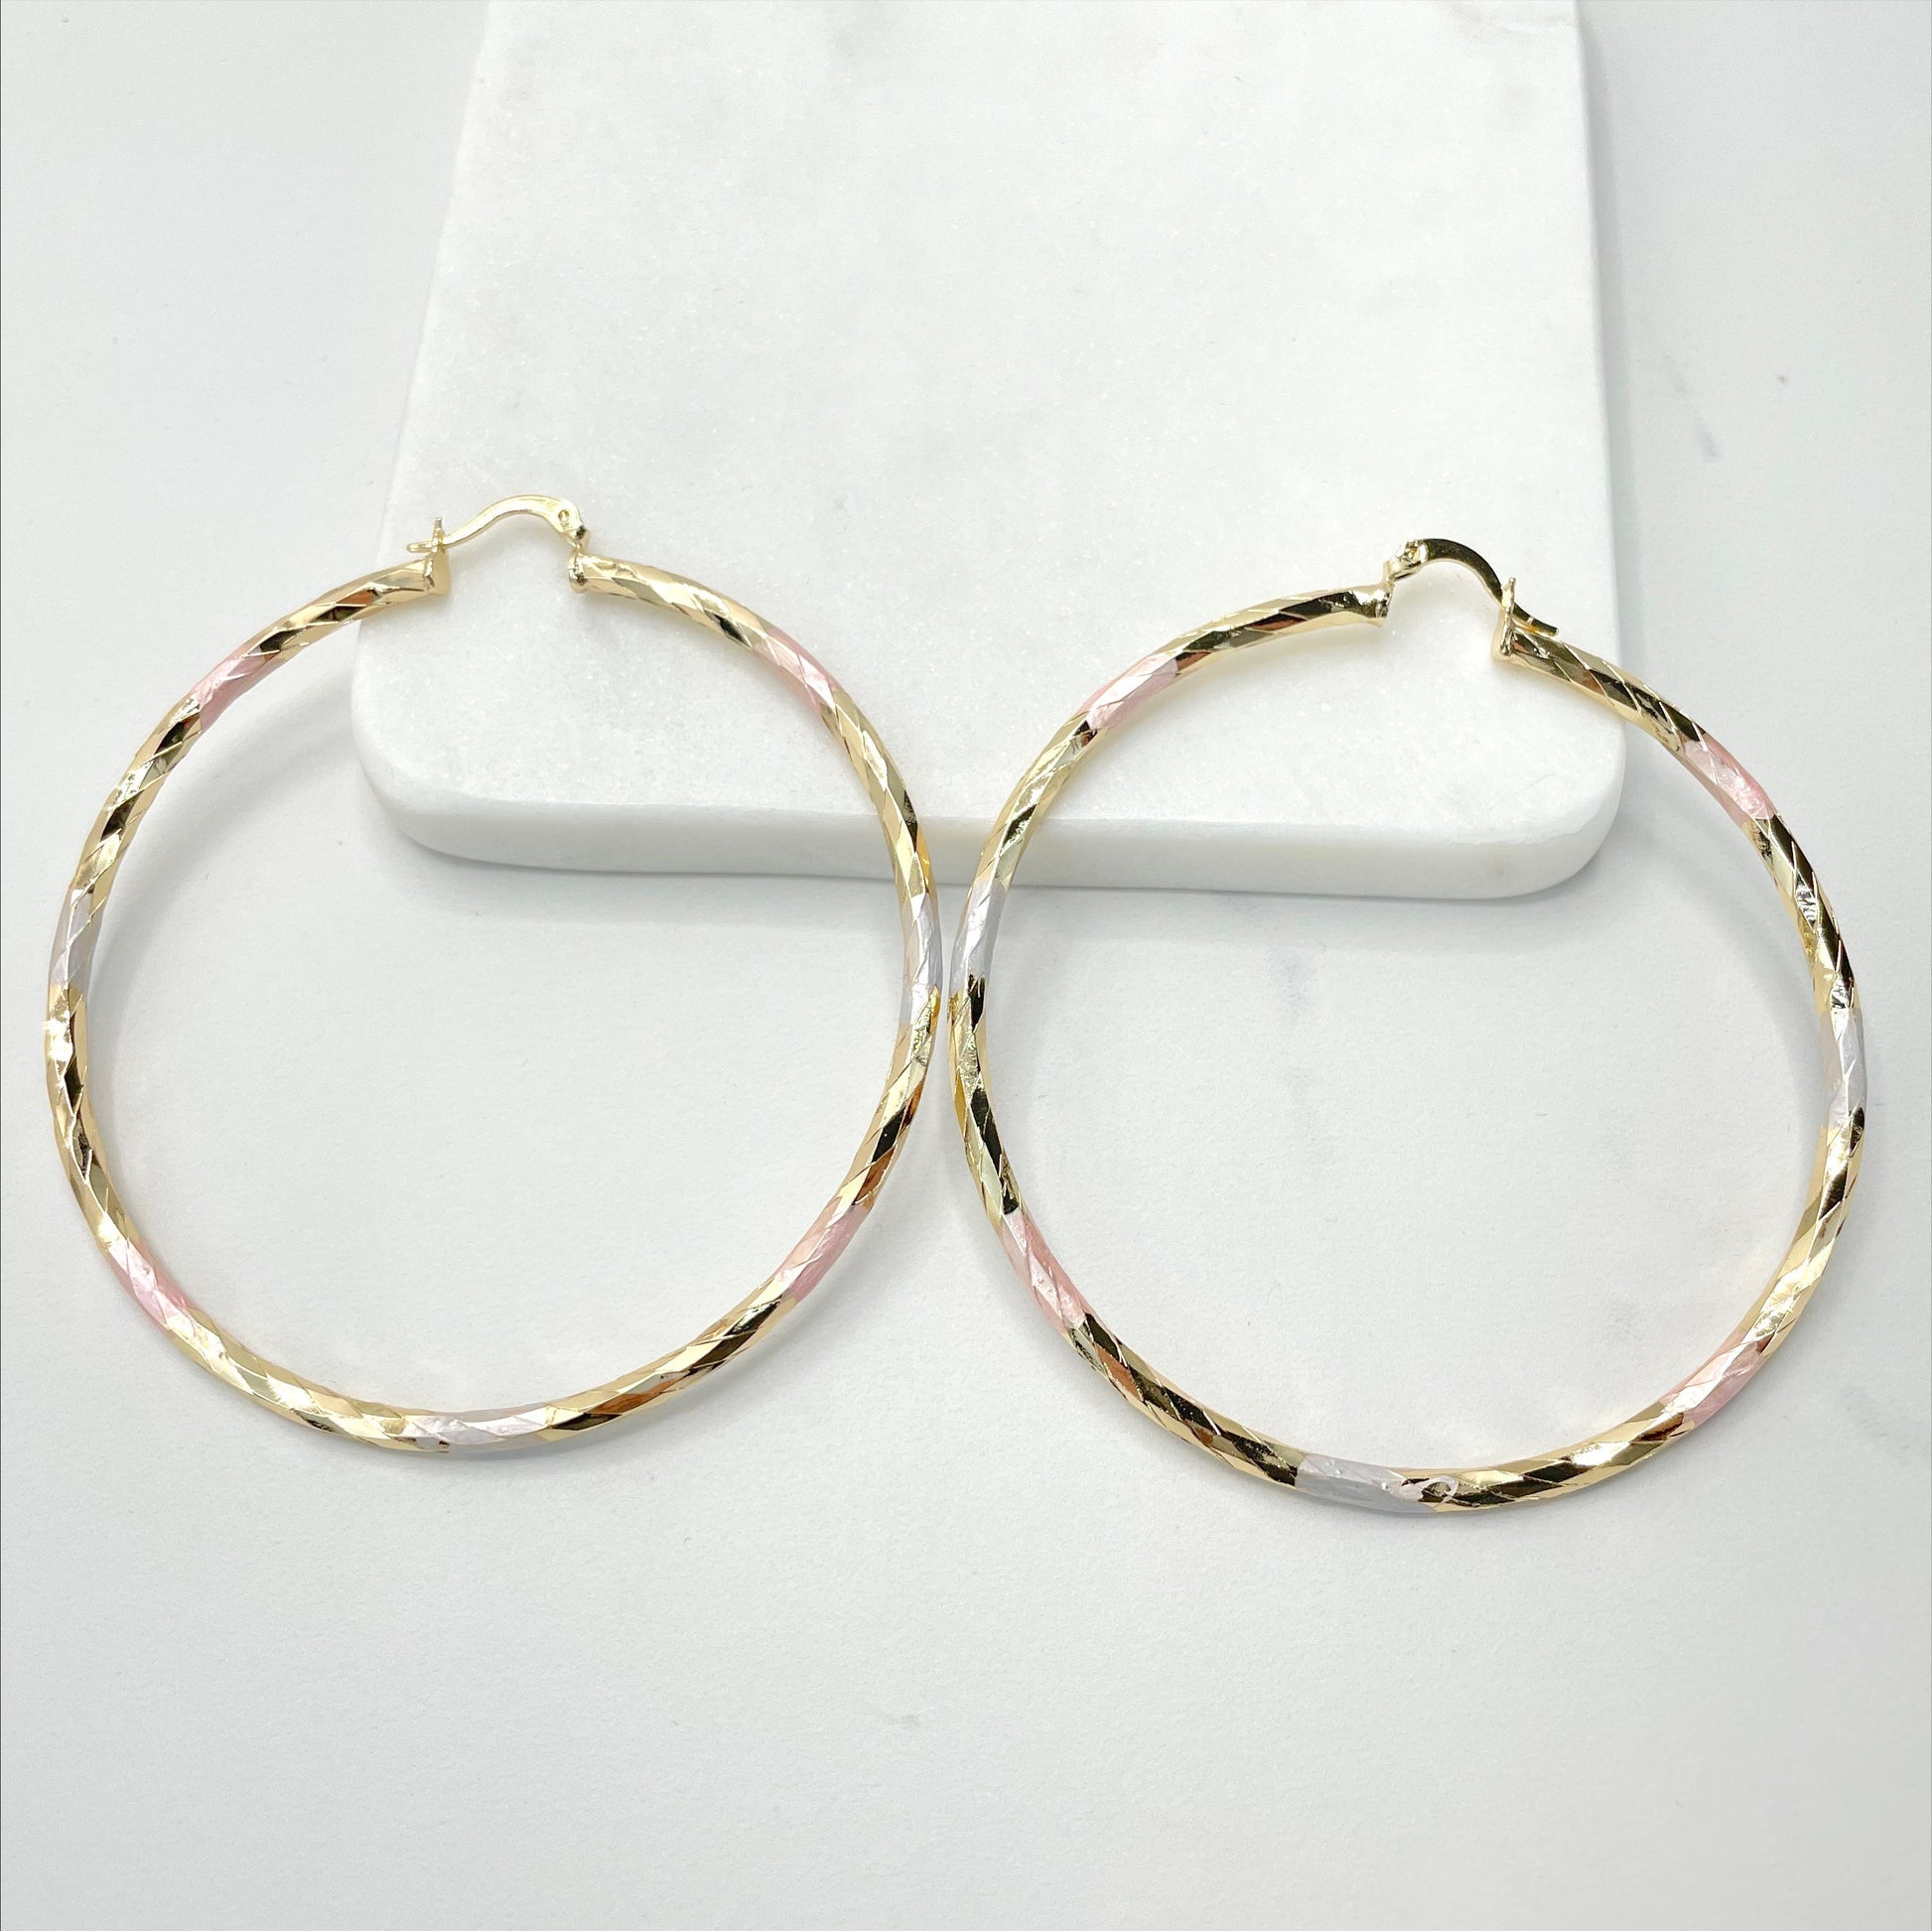 18k Gold Filled Three Tone 60mm or 70mm Hoops Earrings, 3mm Thickness Wholesale Jewelry Making Supplies